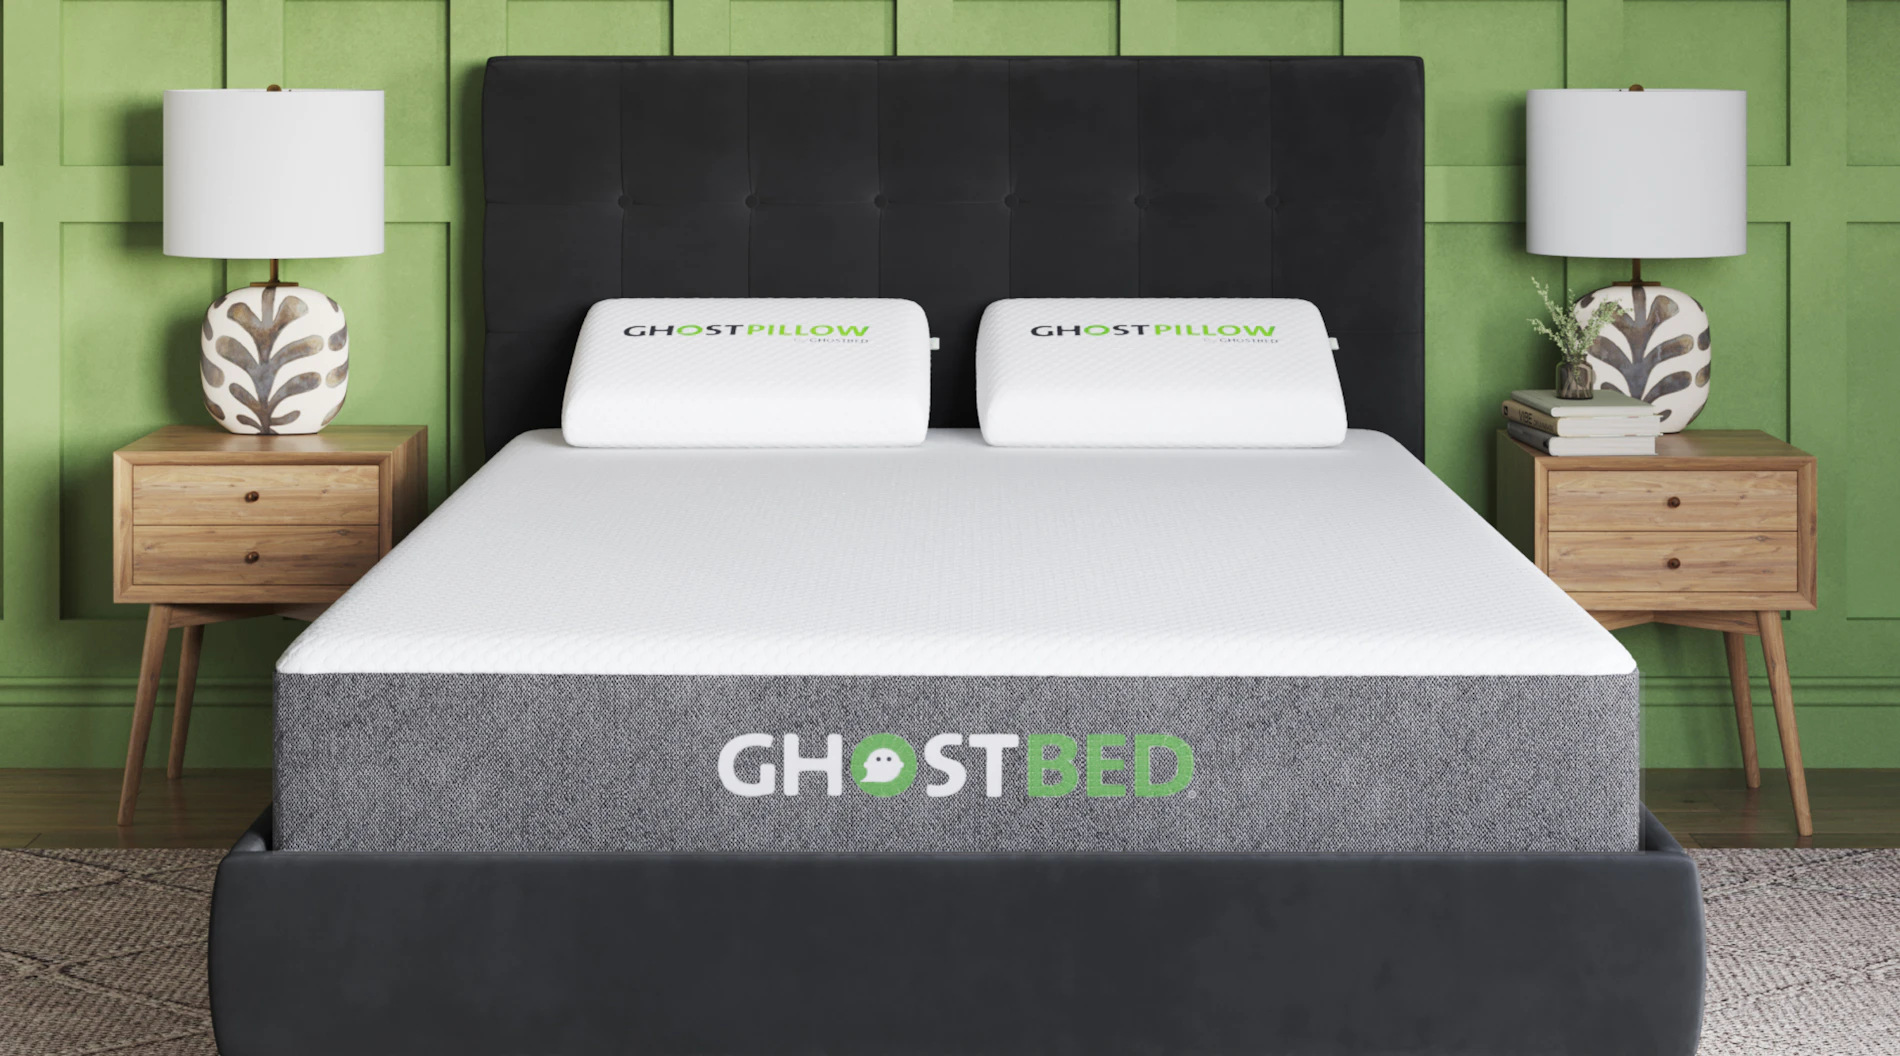 Compare Sleep Number and GhostBed, a common Sleep Number alternative